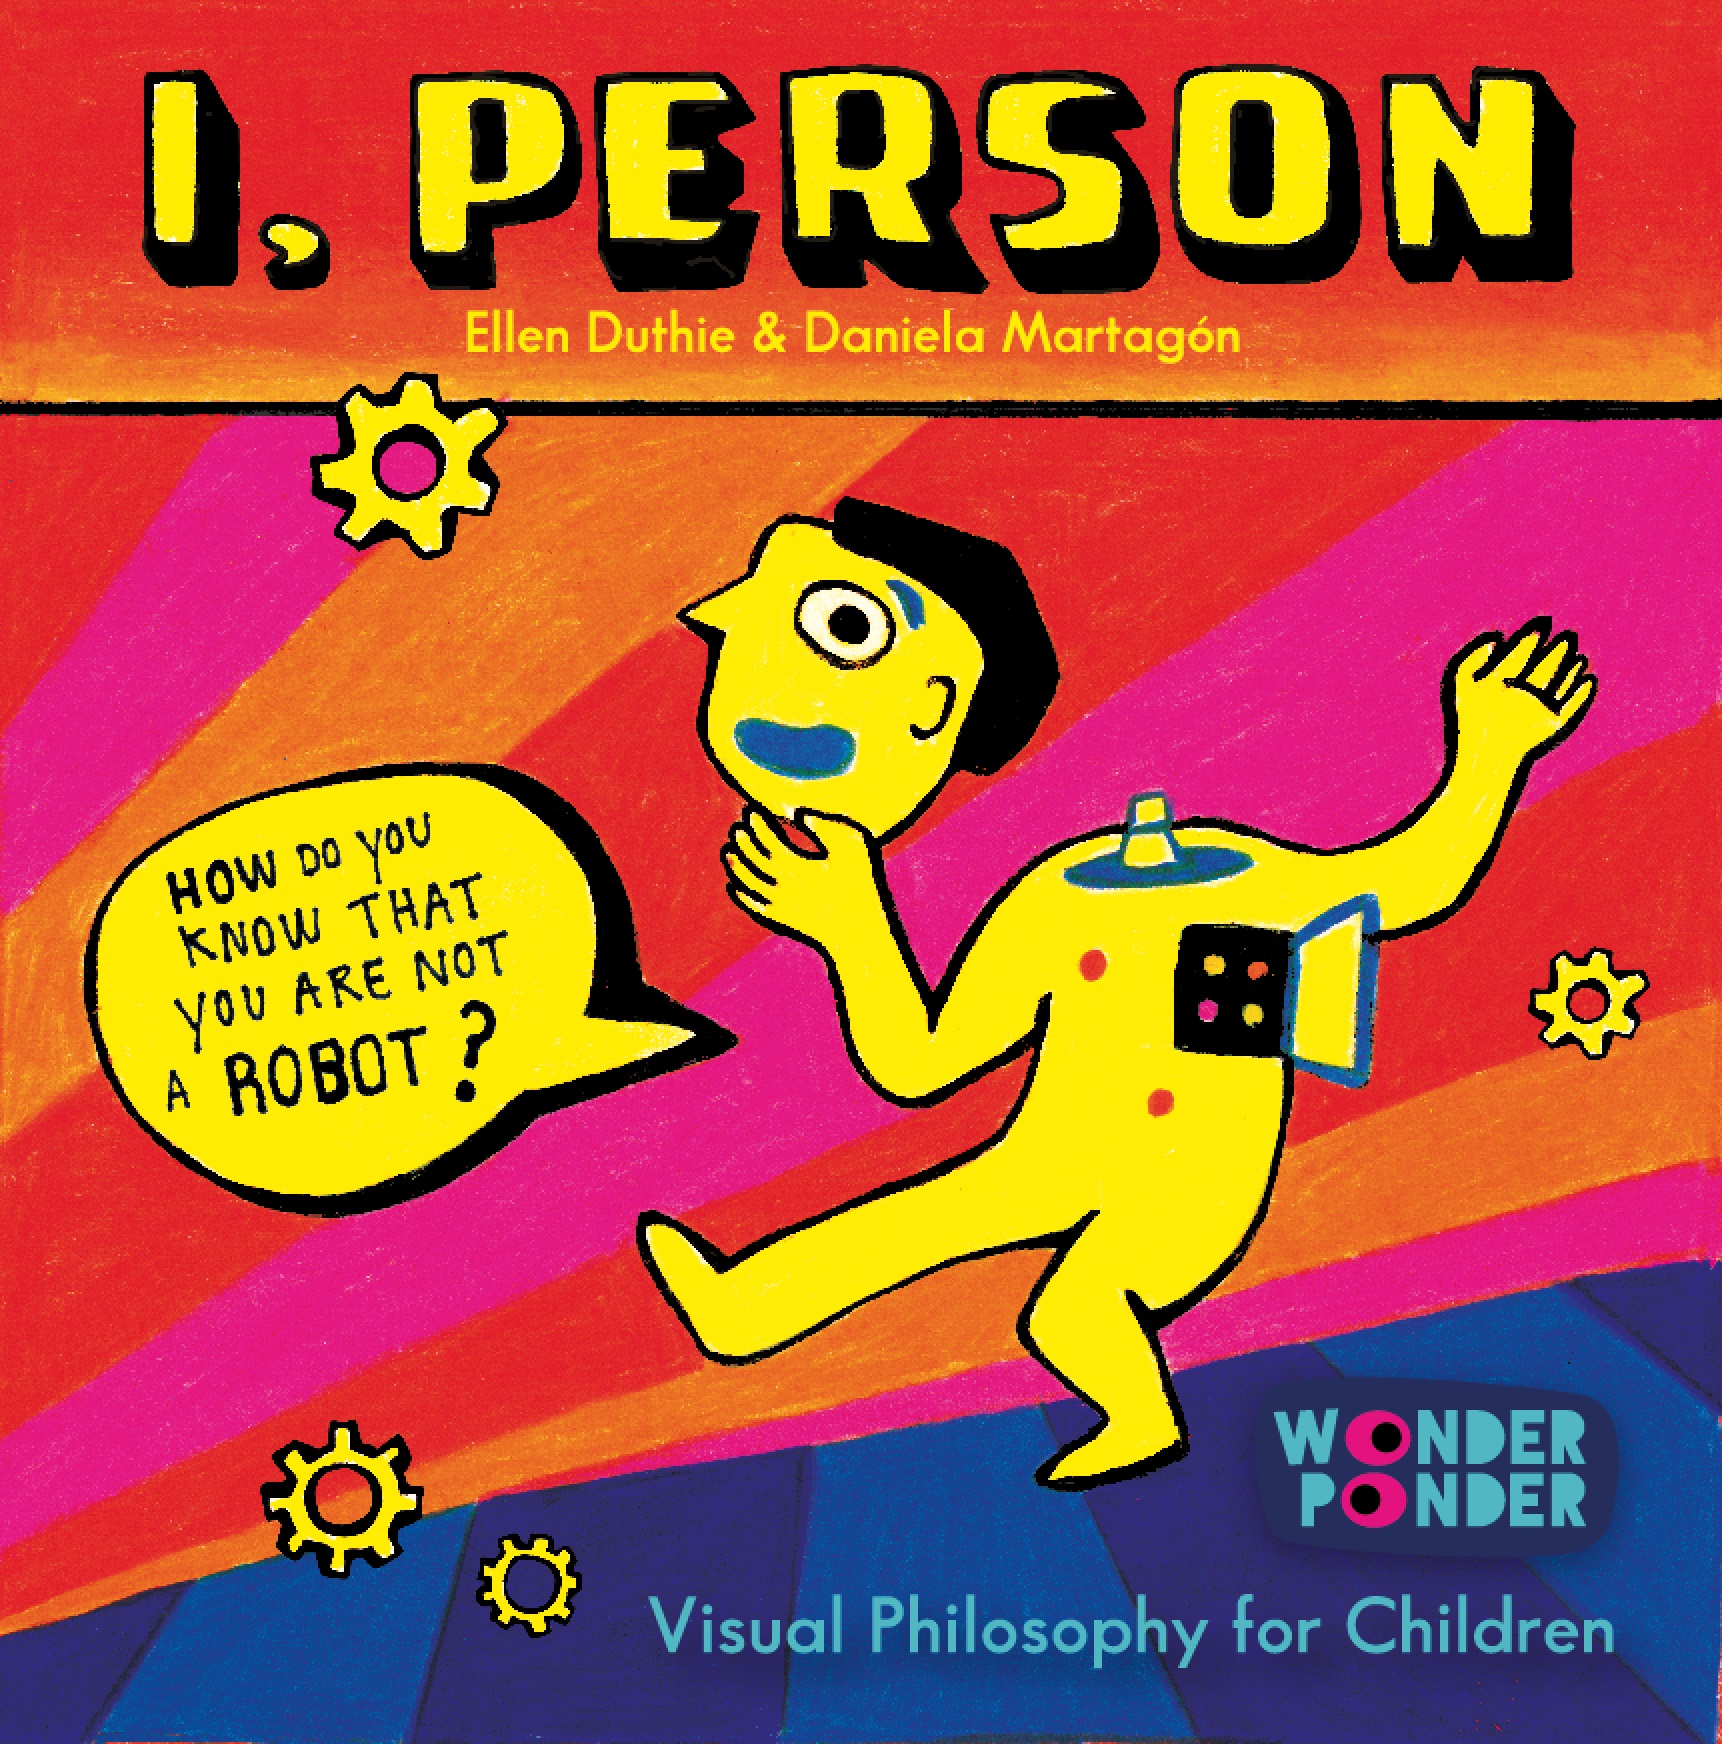 I, Person Cover.jpg